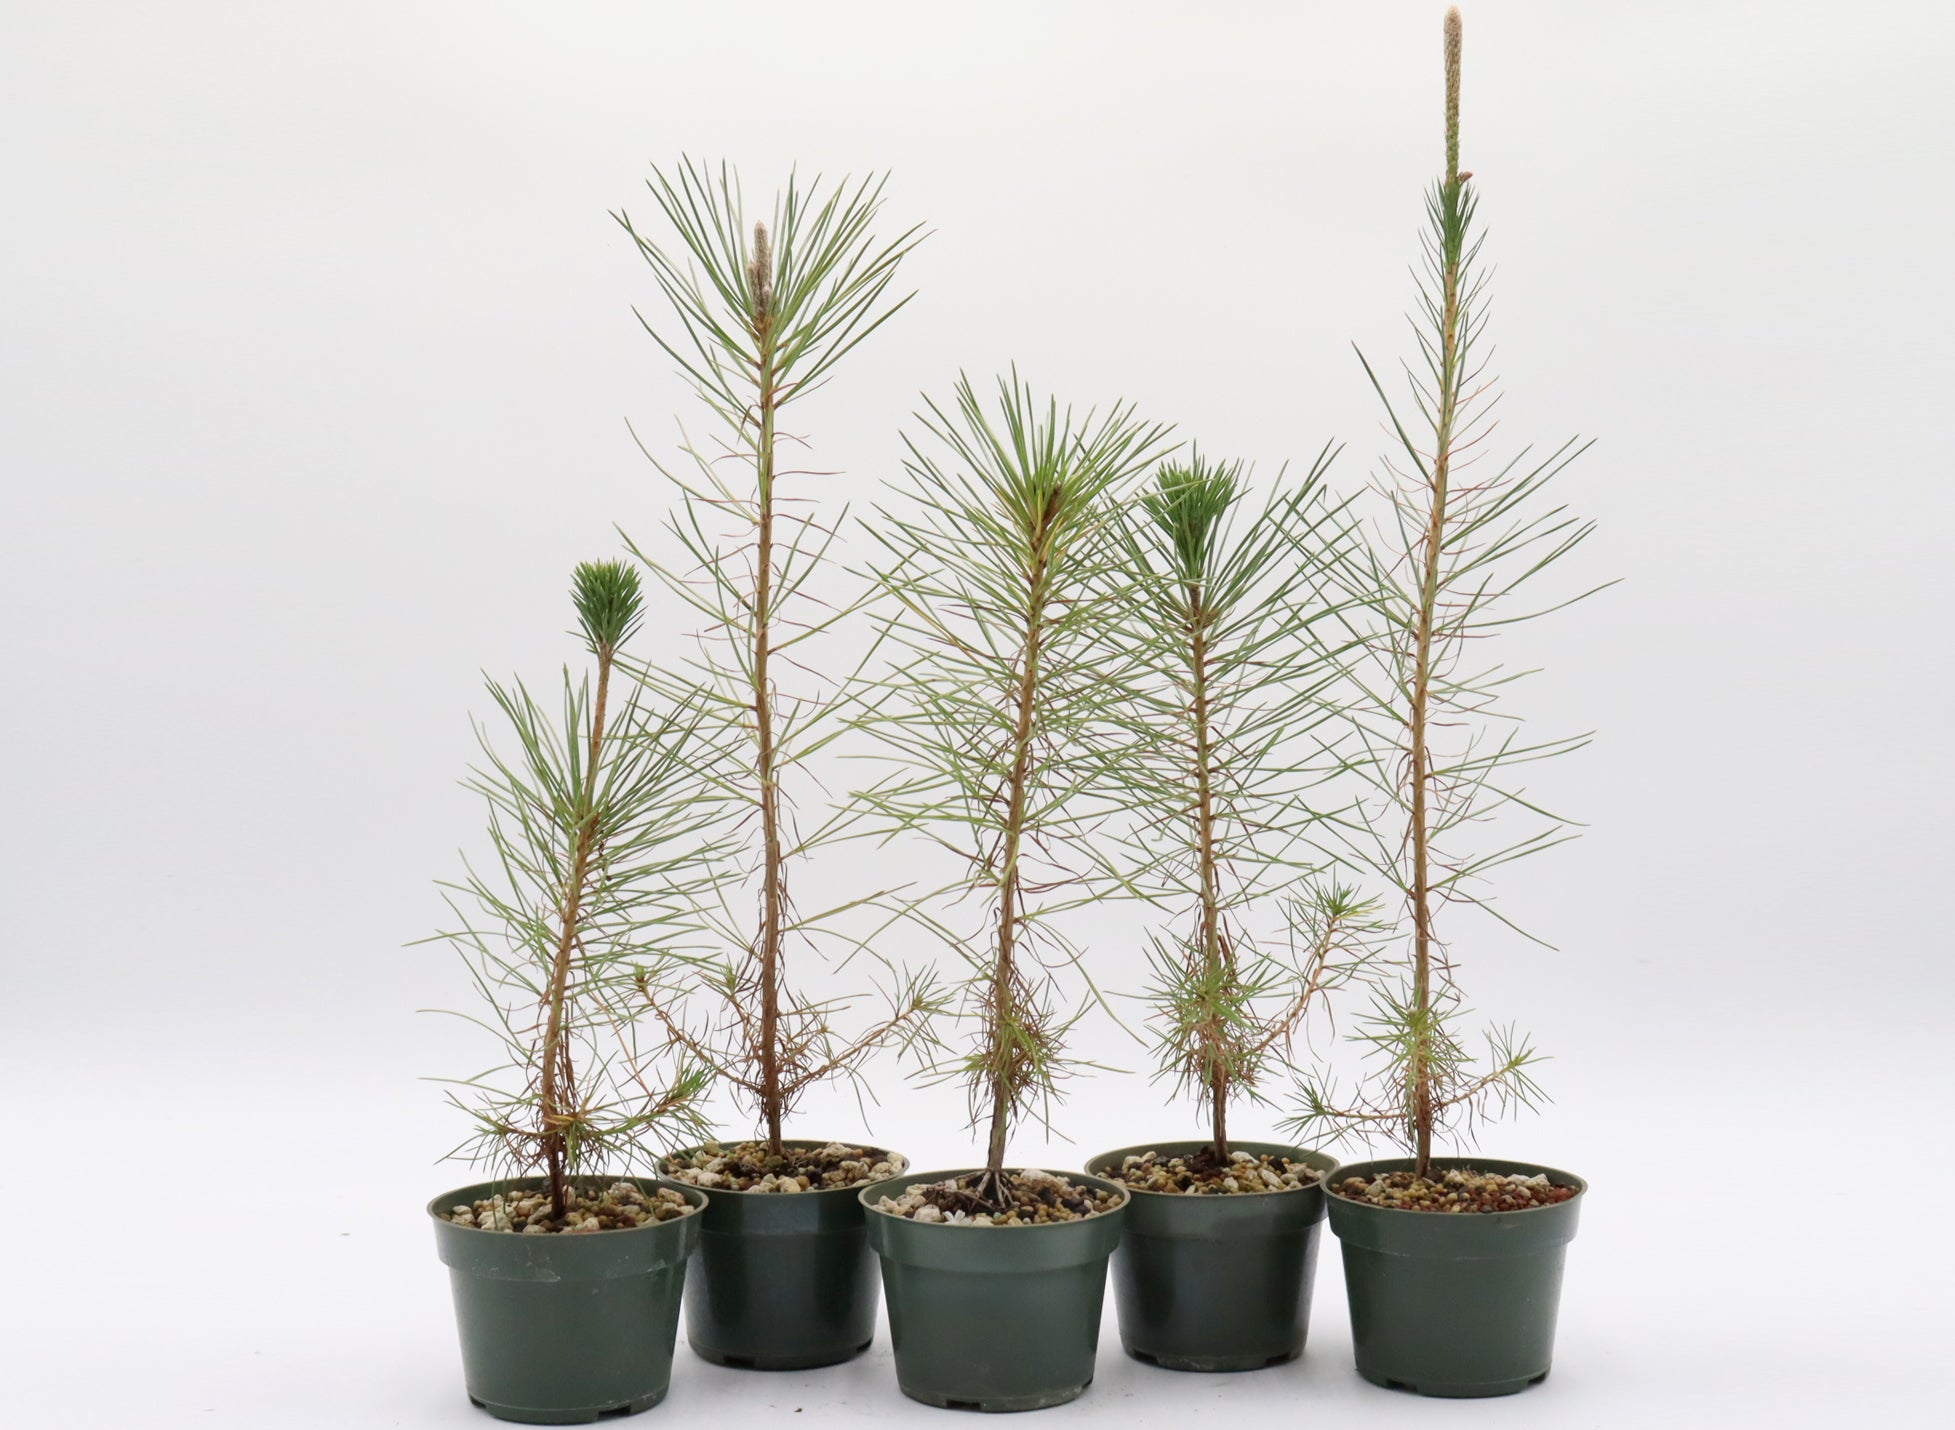 Assorted Japanese Black Pine Seedlings in Four Inch Plastic Pots